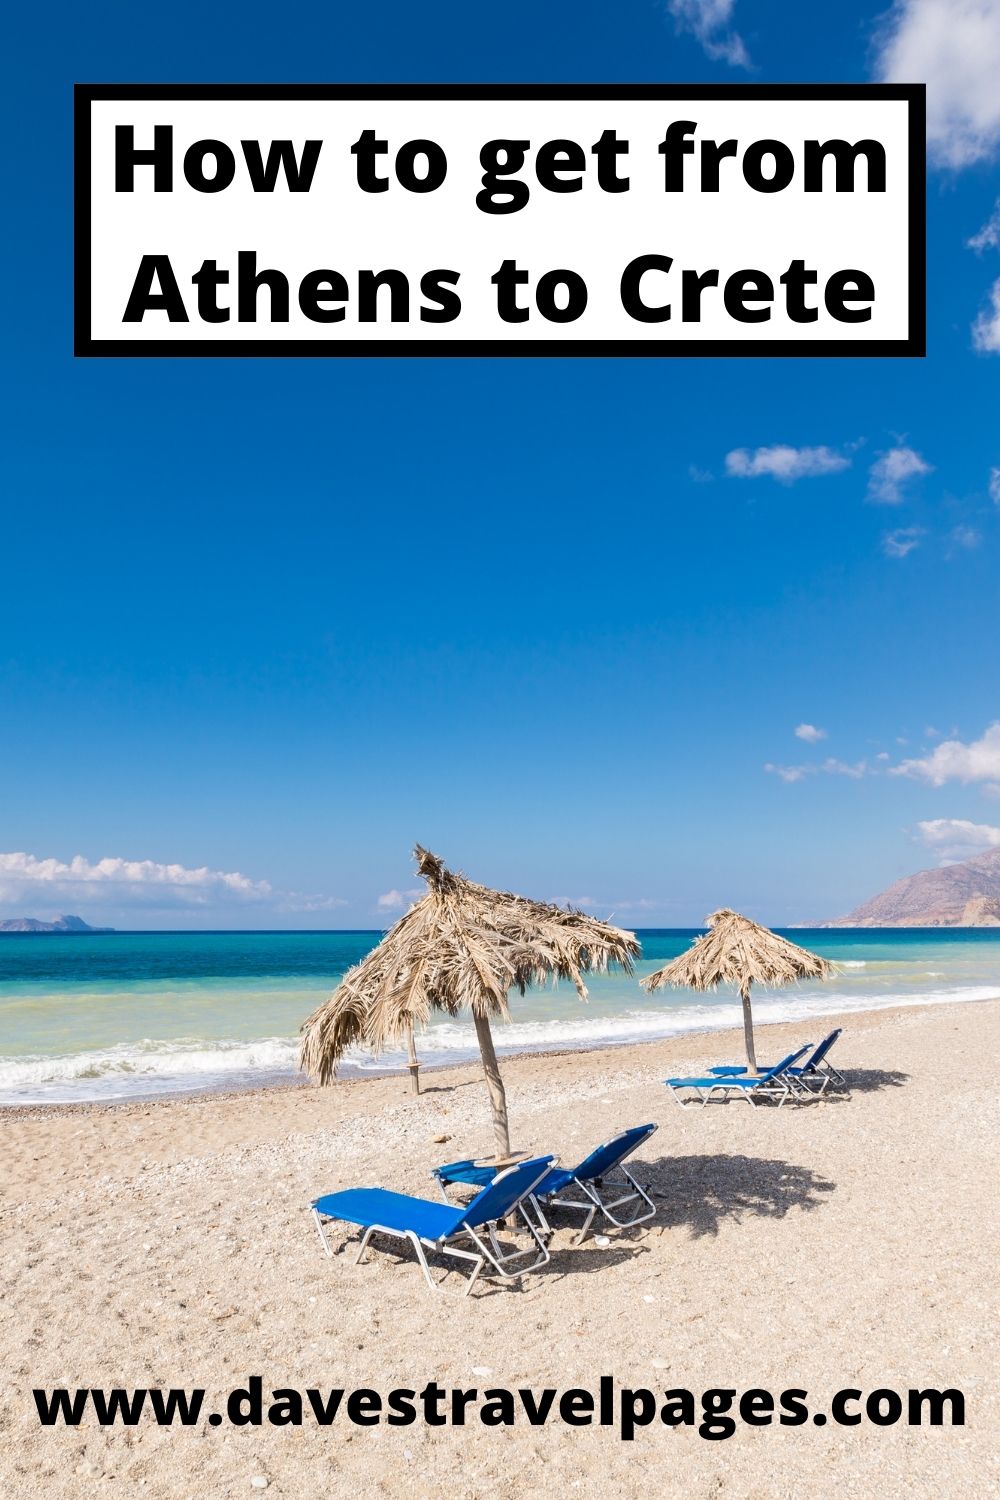 All the ways to get from Athens to Crete in Greece